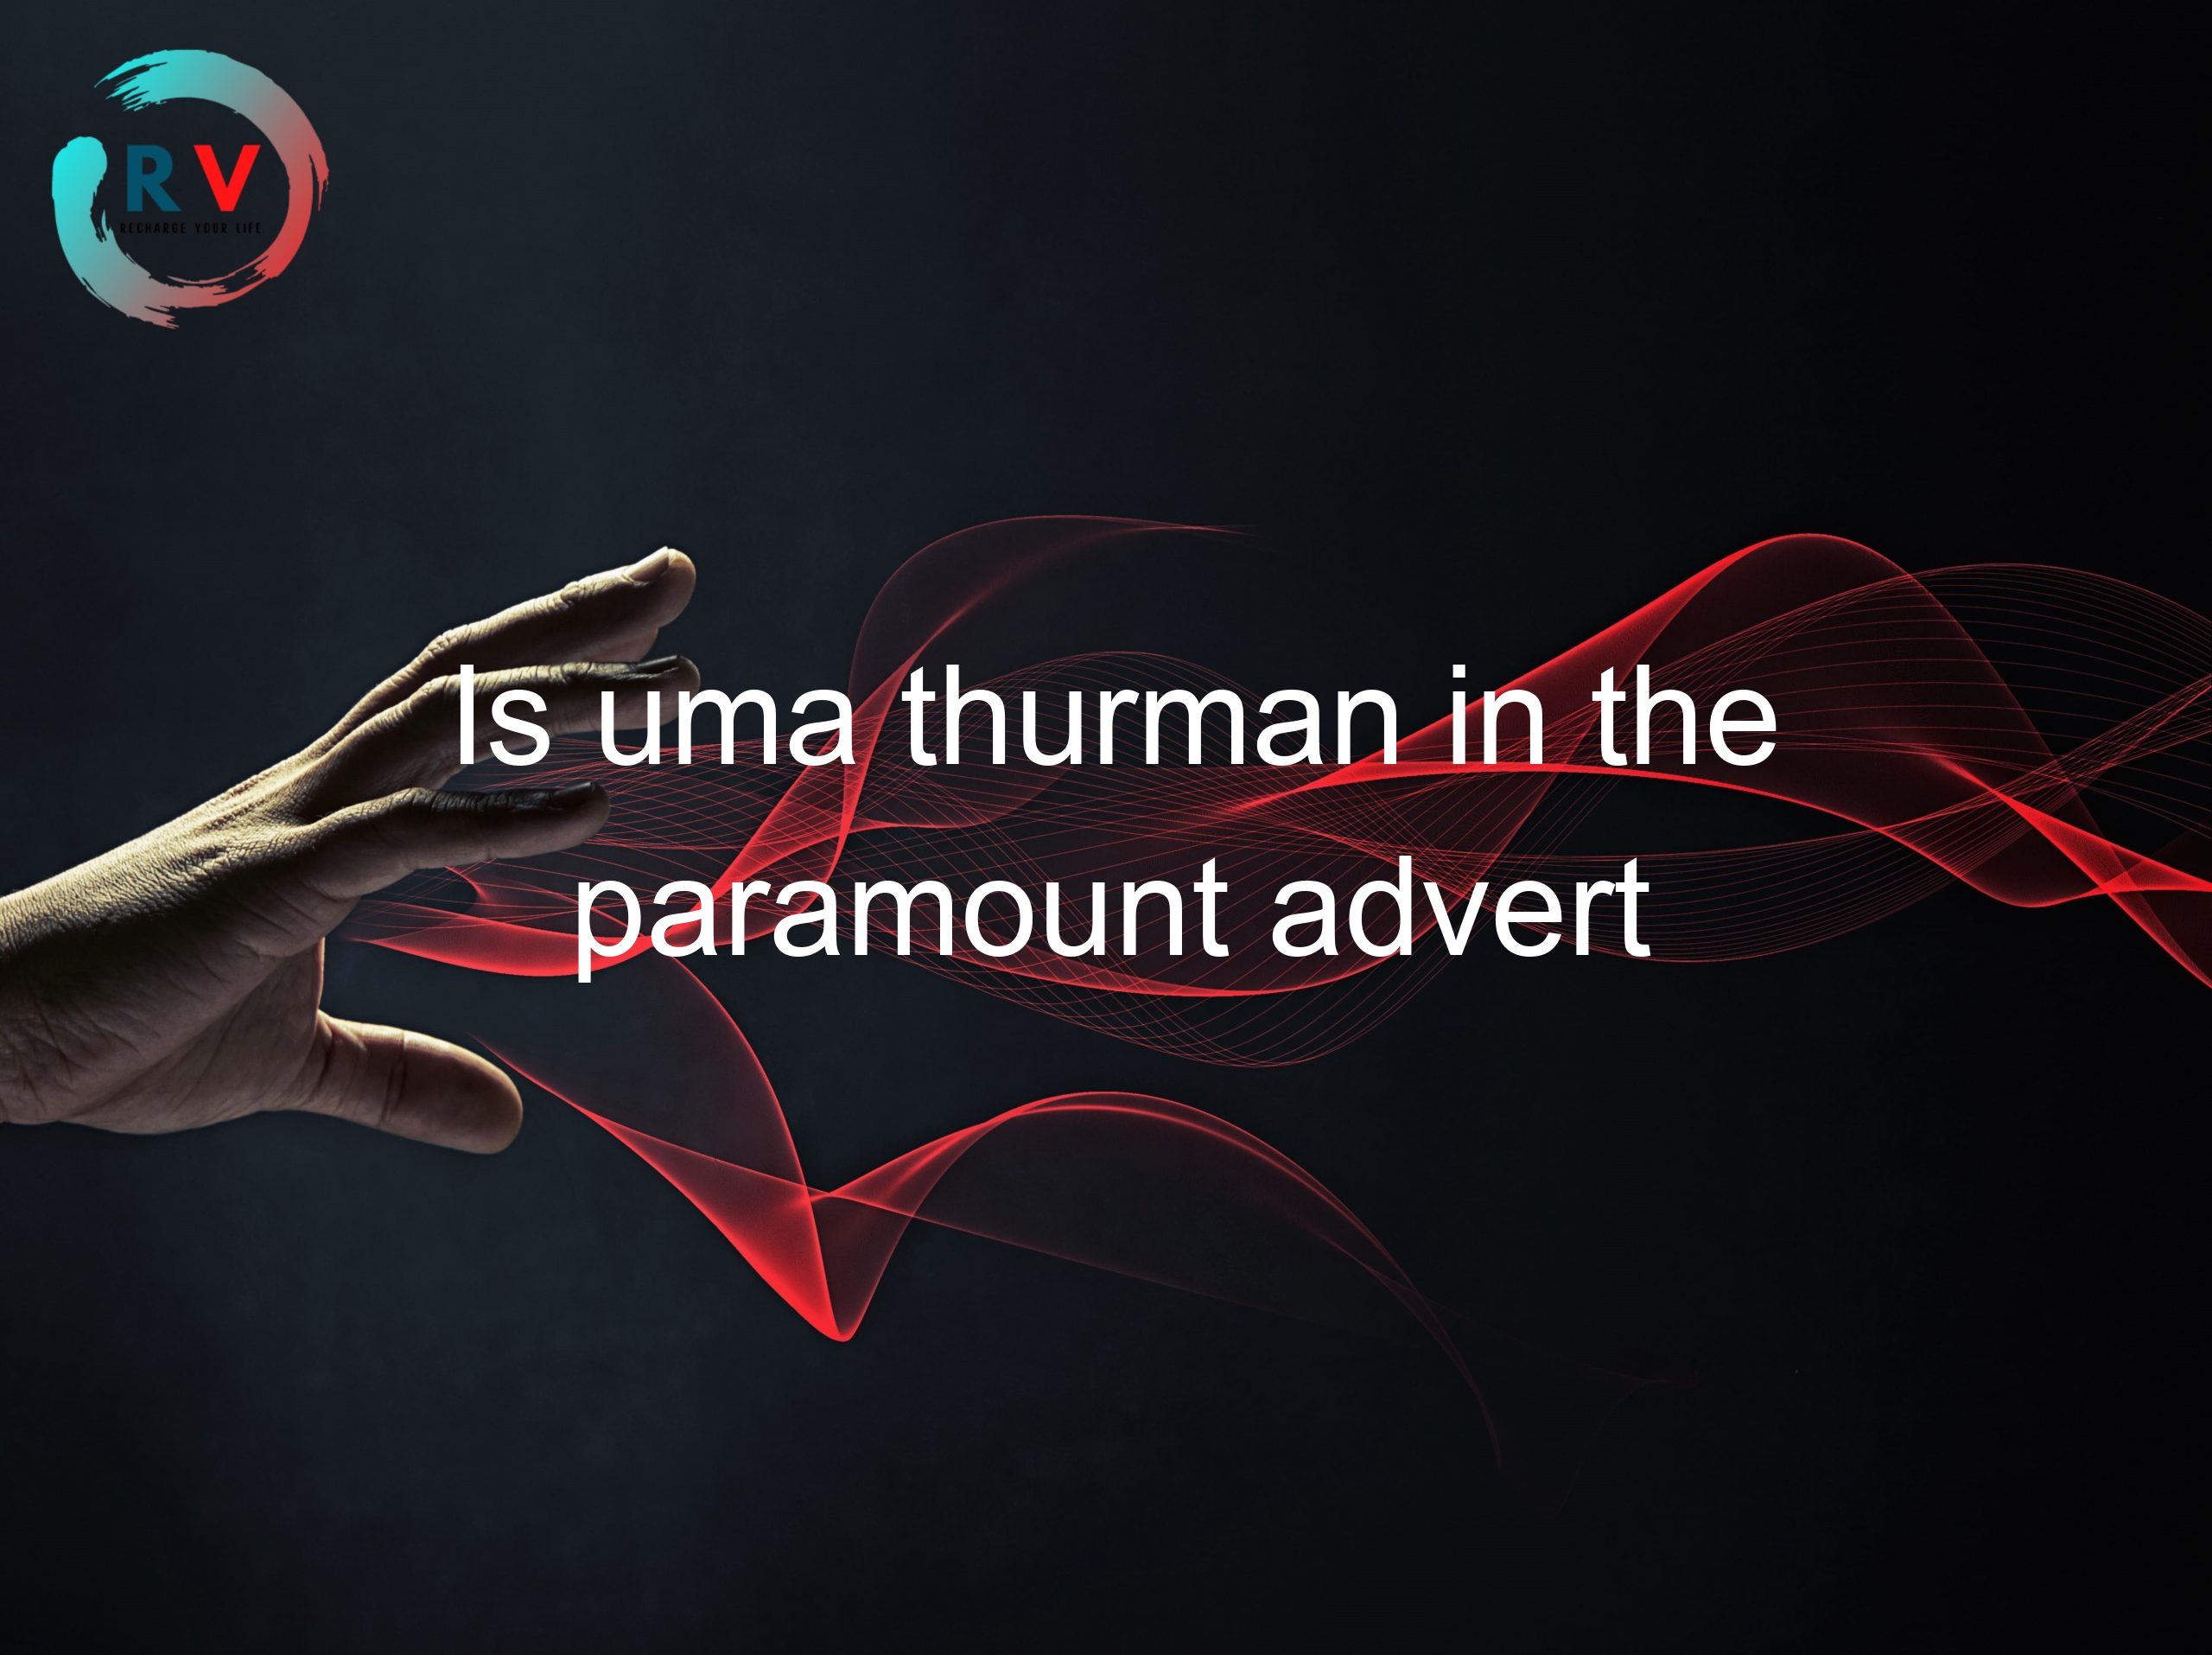 Is uma thurman in the paramount advert